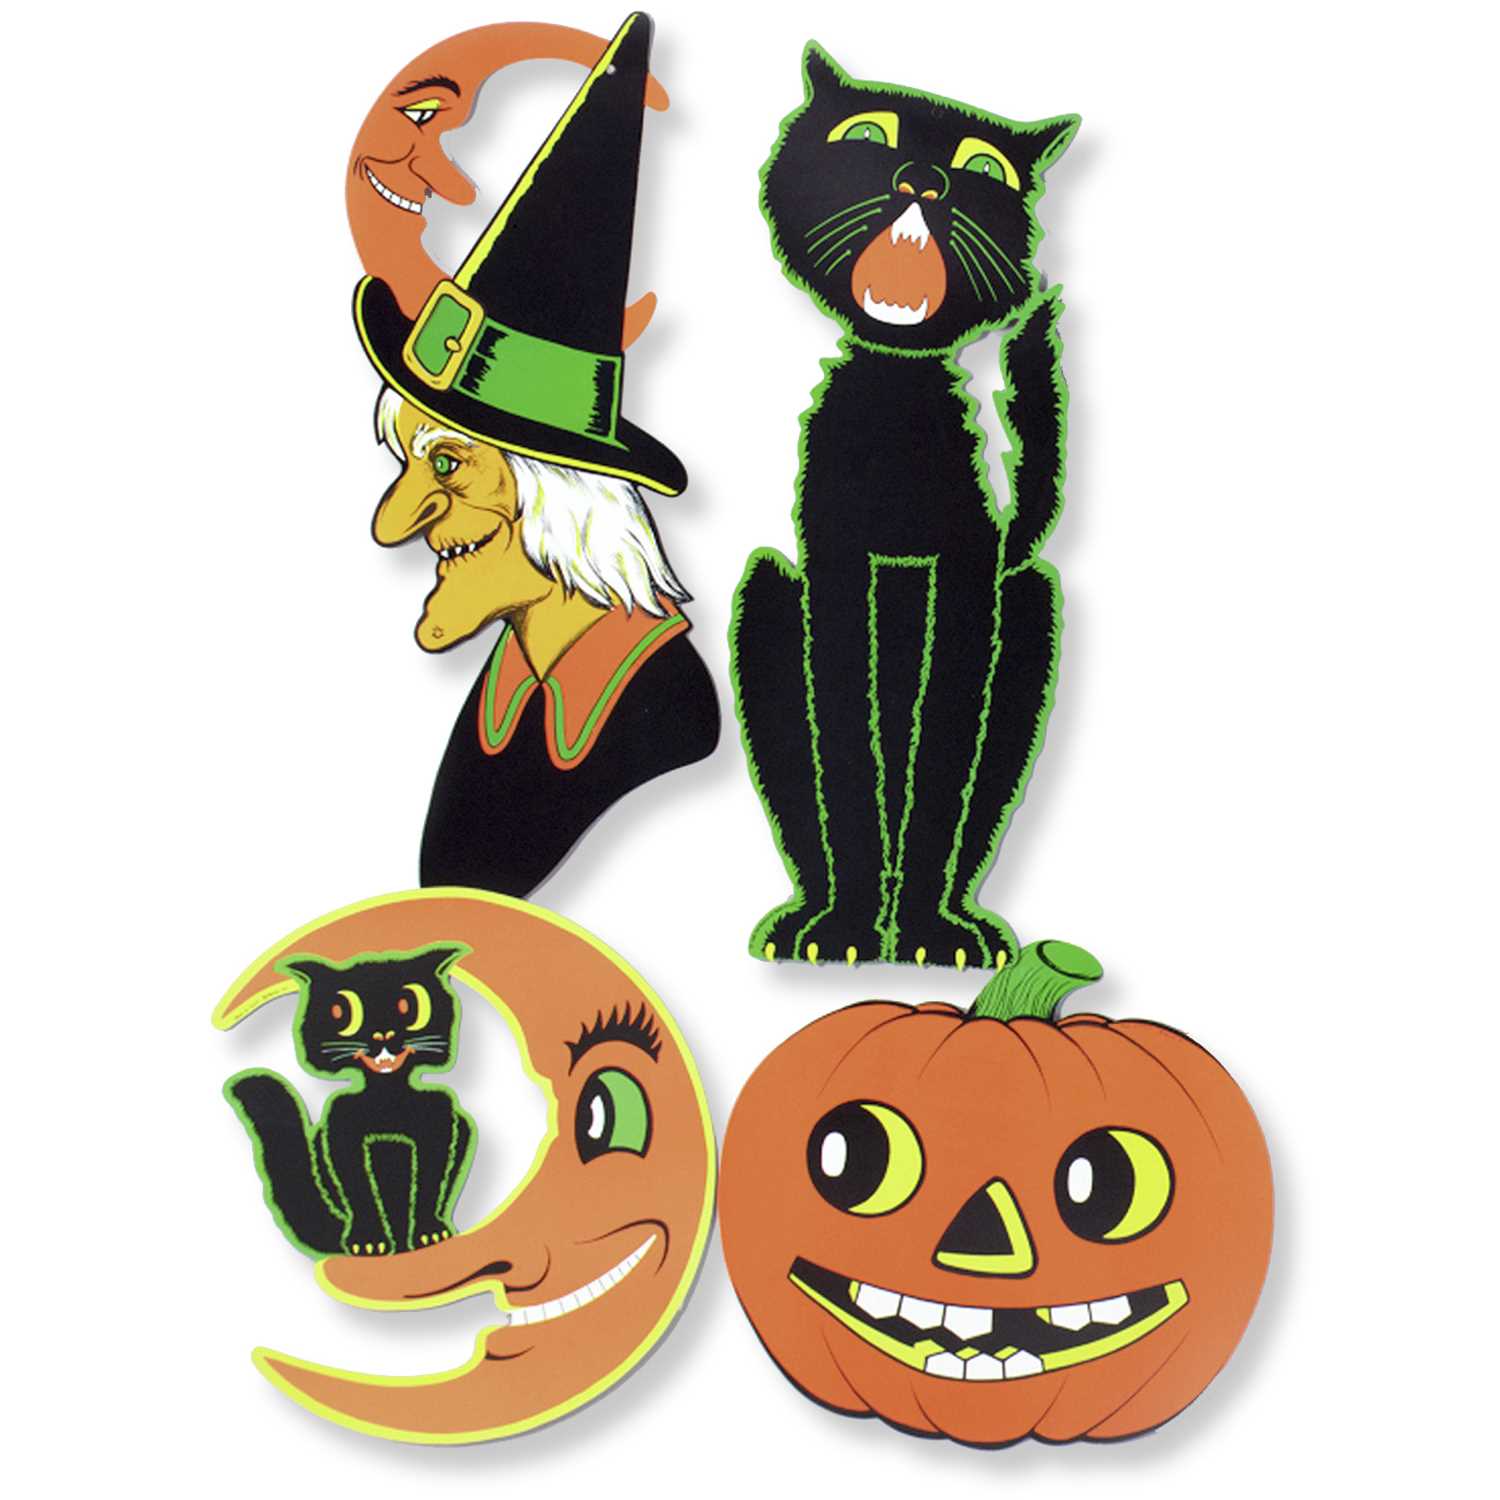 Vintage Halloween Cutouts with Black Cat Designs and Vintage Pumpkins Cutouts Perfect Vintage Halloween Party Decorations and Vintage Halloween Decor! Vintage Halloween Decorations MEGA PACK 